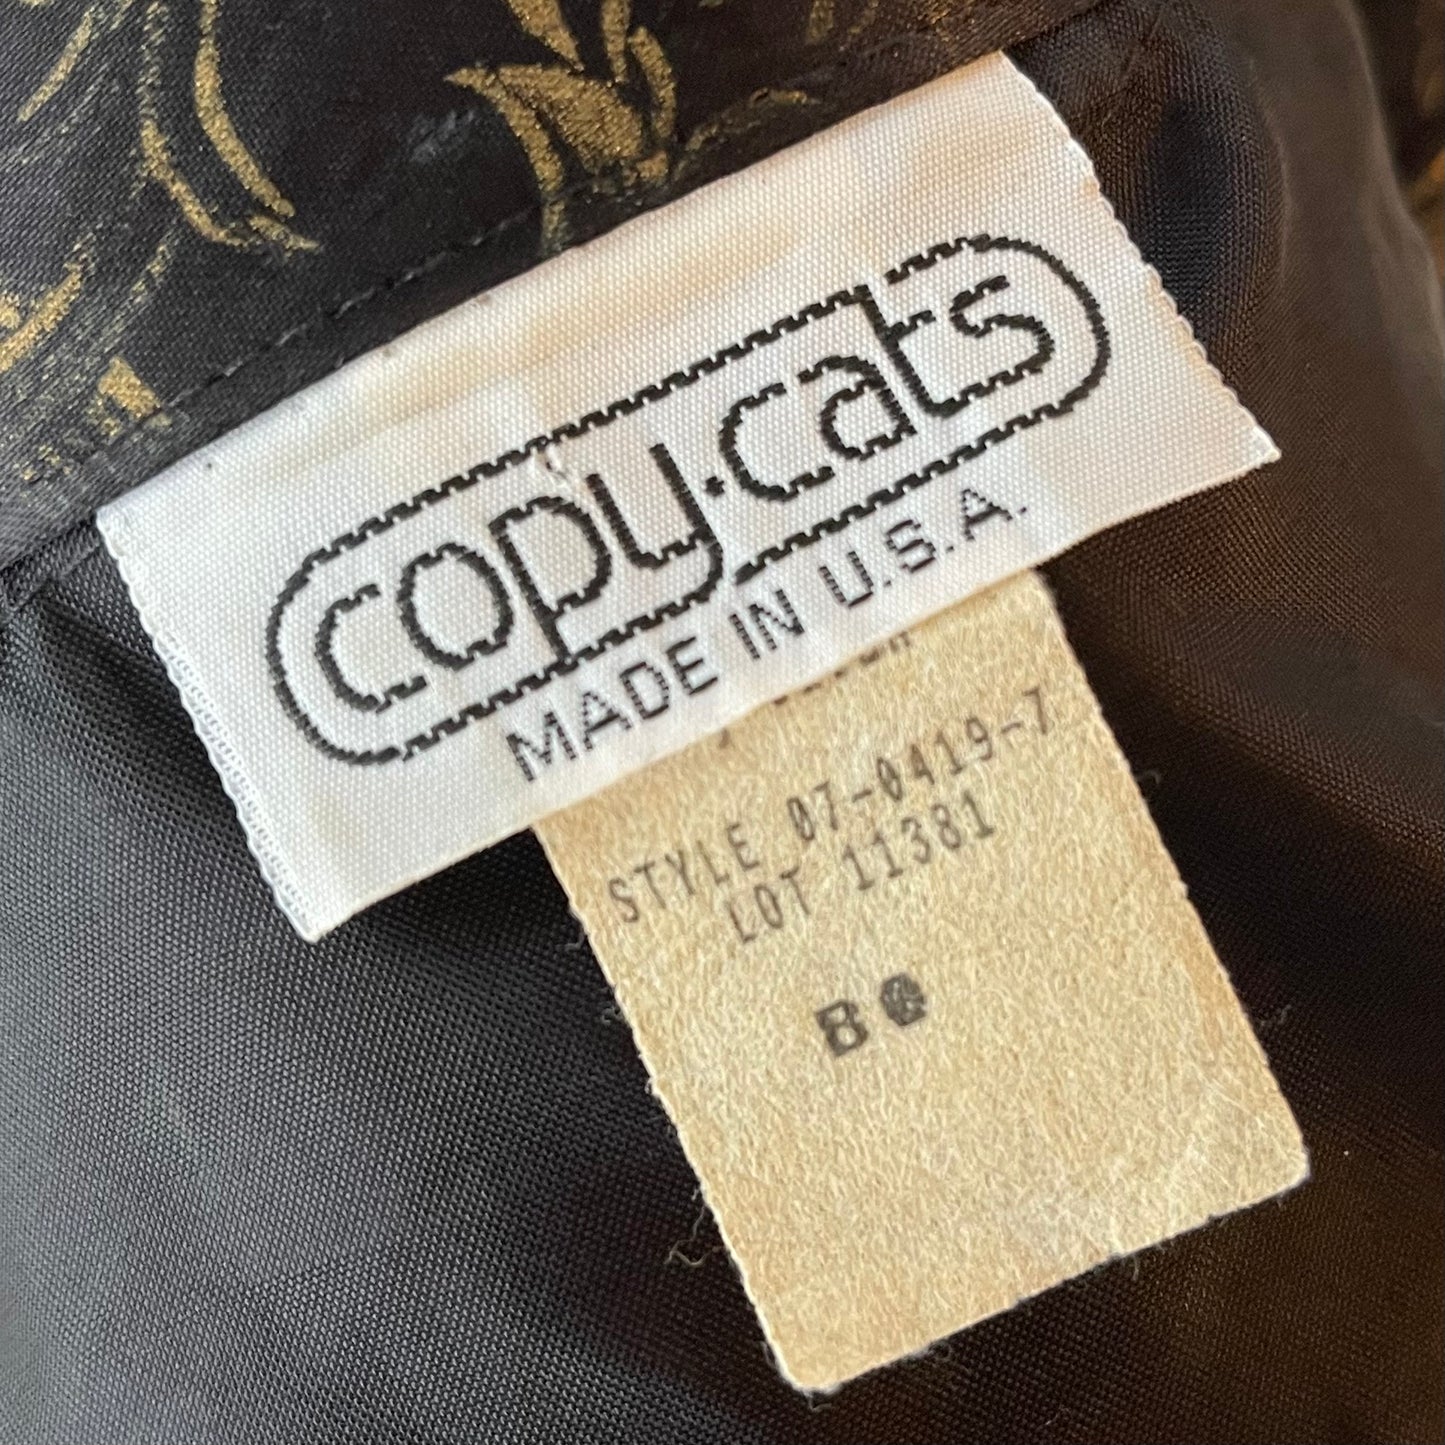 Vintage Satin Oversized Top by Copy Cats 80’s